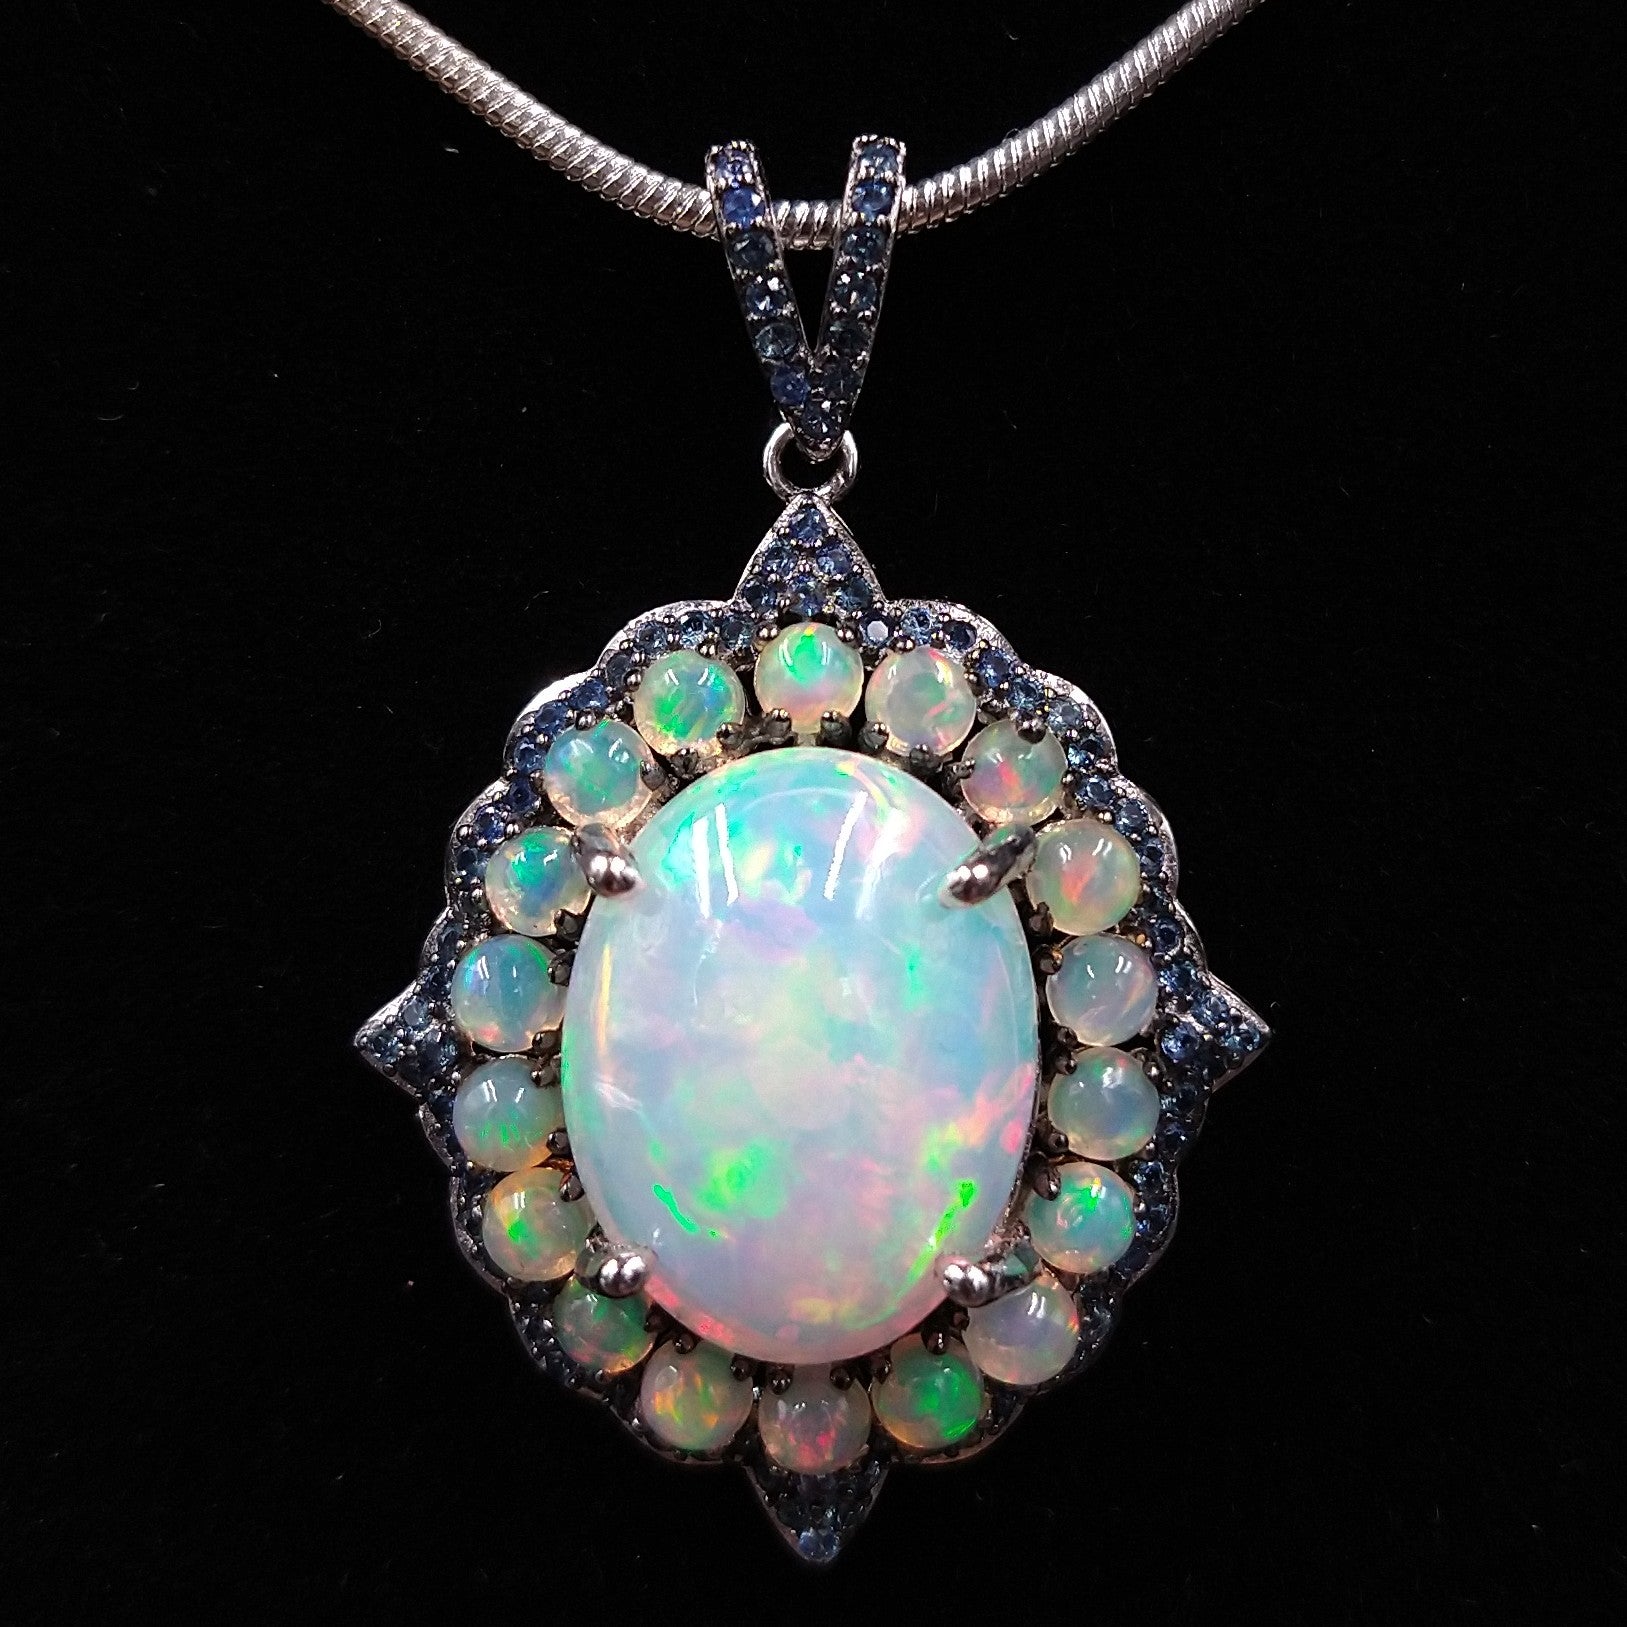 OP-393 Ethiopian Opal and Sterling Silver Pendant